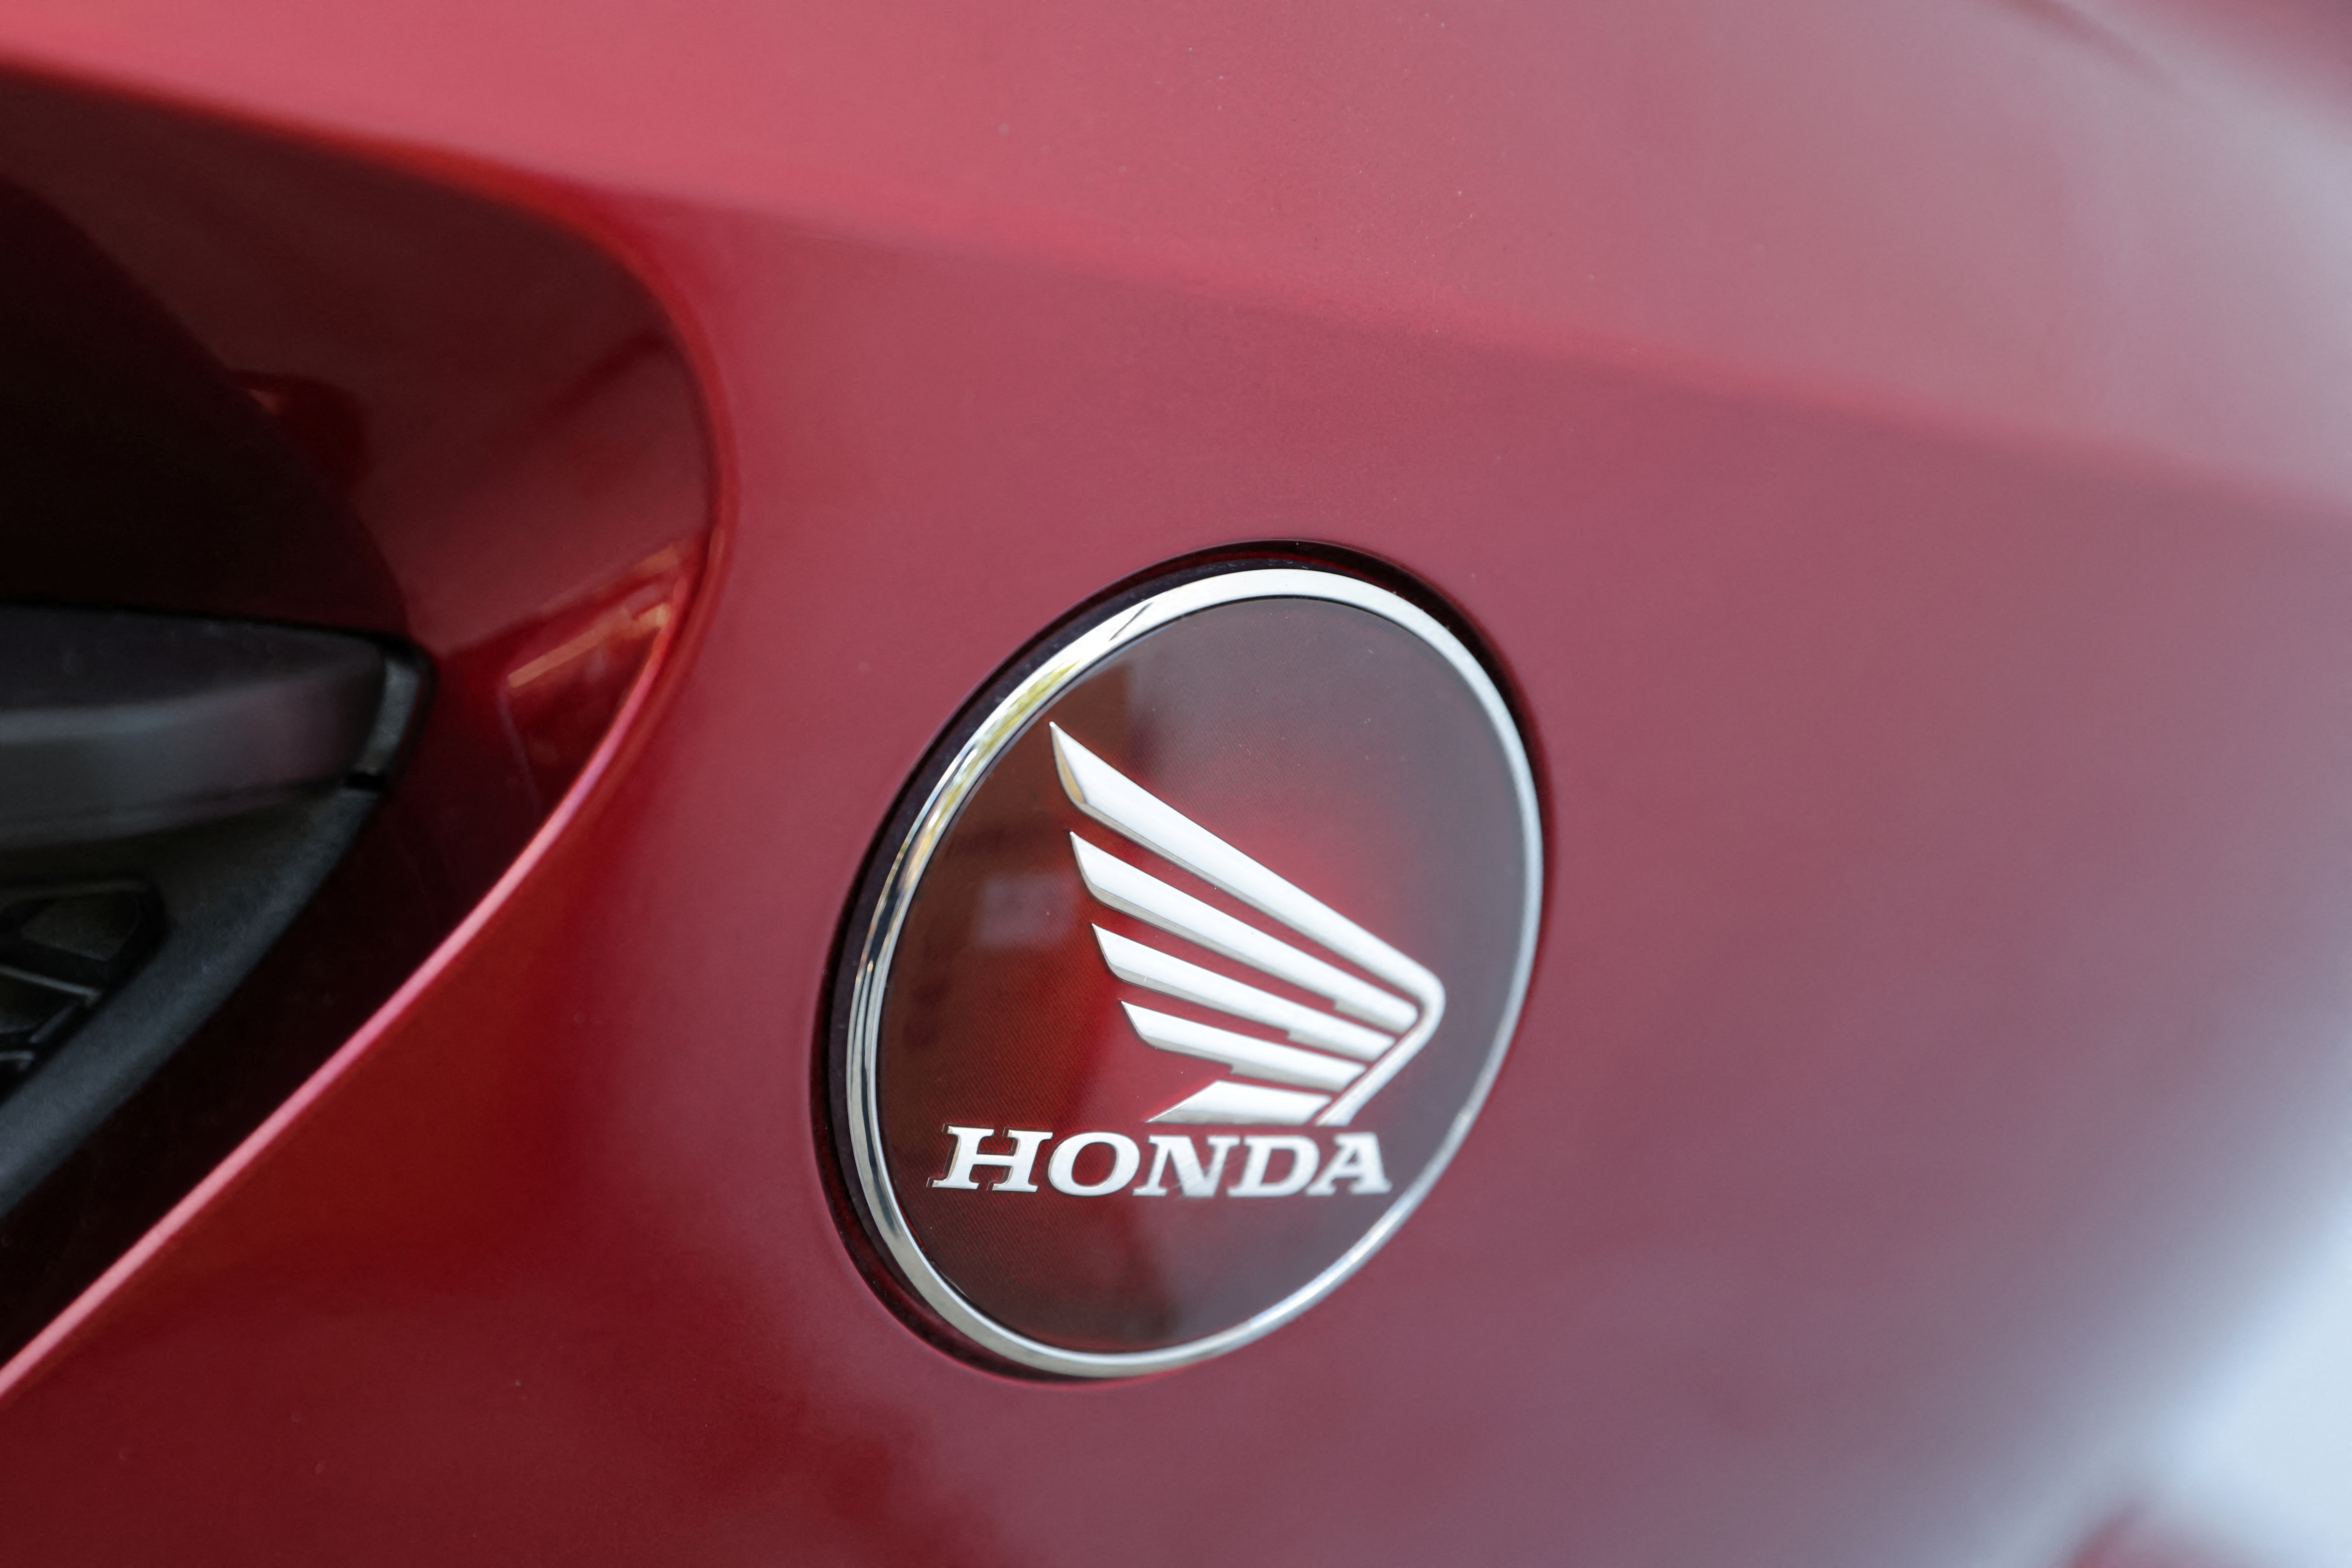 Branding is seen on a Honda motorcycle at New York Honda Yamaha in Queens, New York City